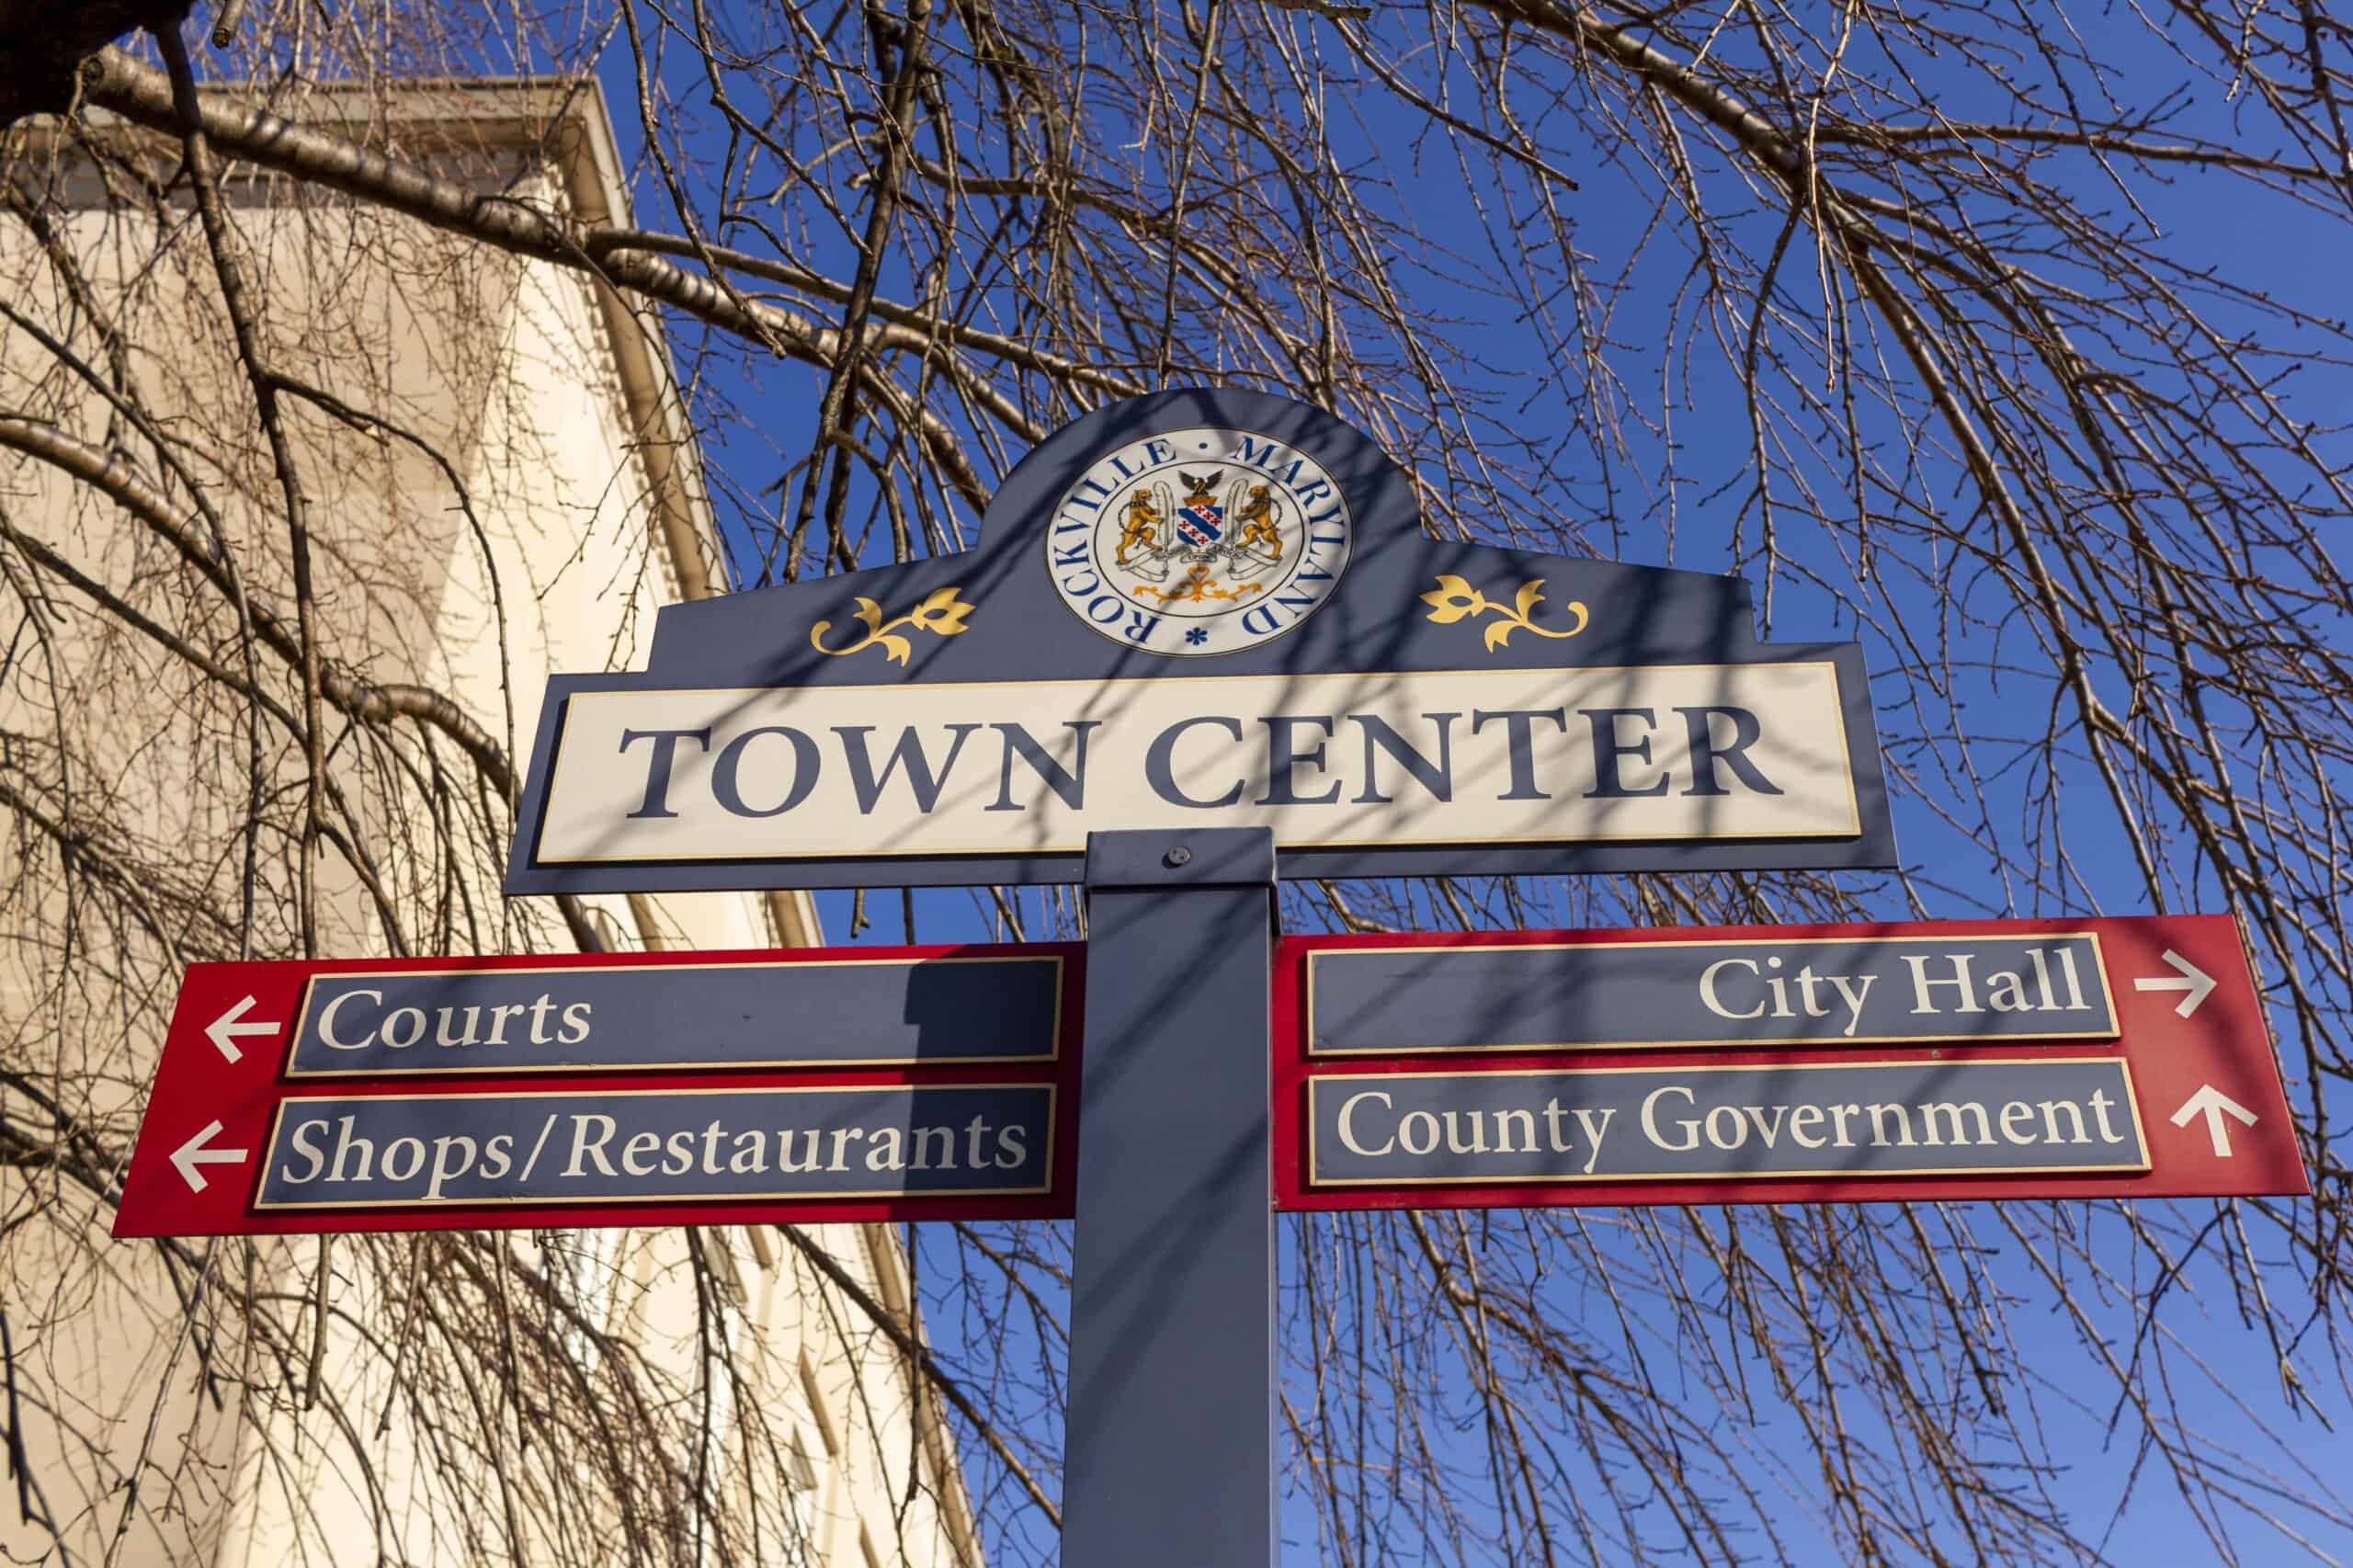 Rockville, Maryland | sign post located in the town center of Rockville, Maryland showing directions of shops, courts and government offices